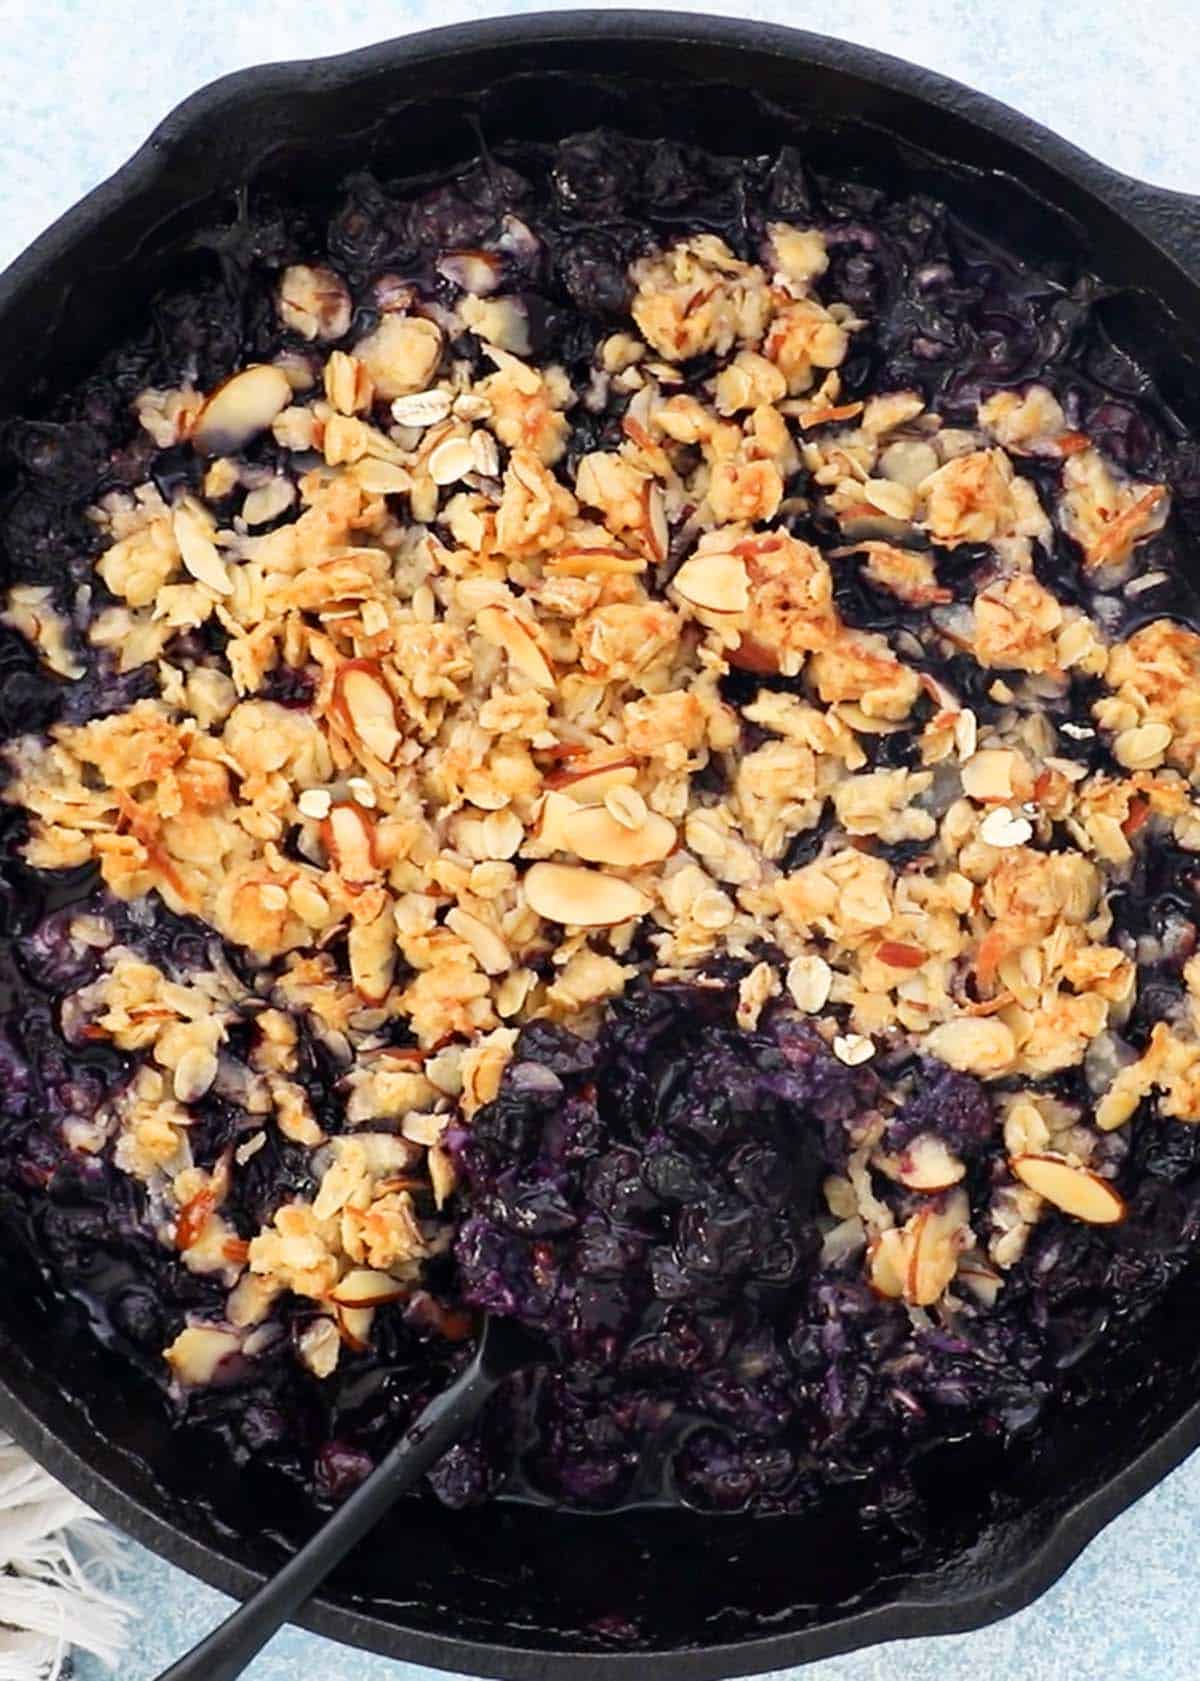 baked blueberry crisp with crumble topping in a black skillet.